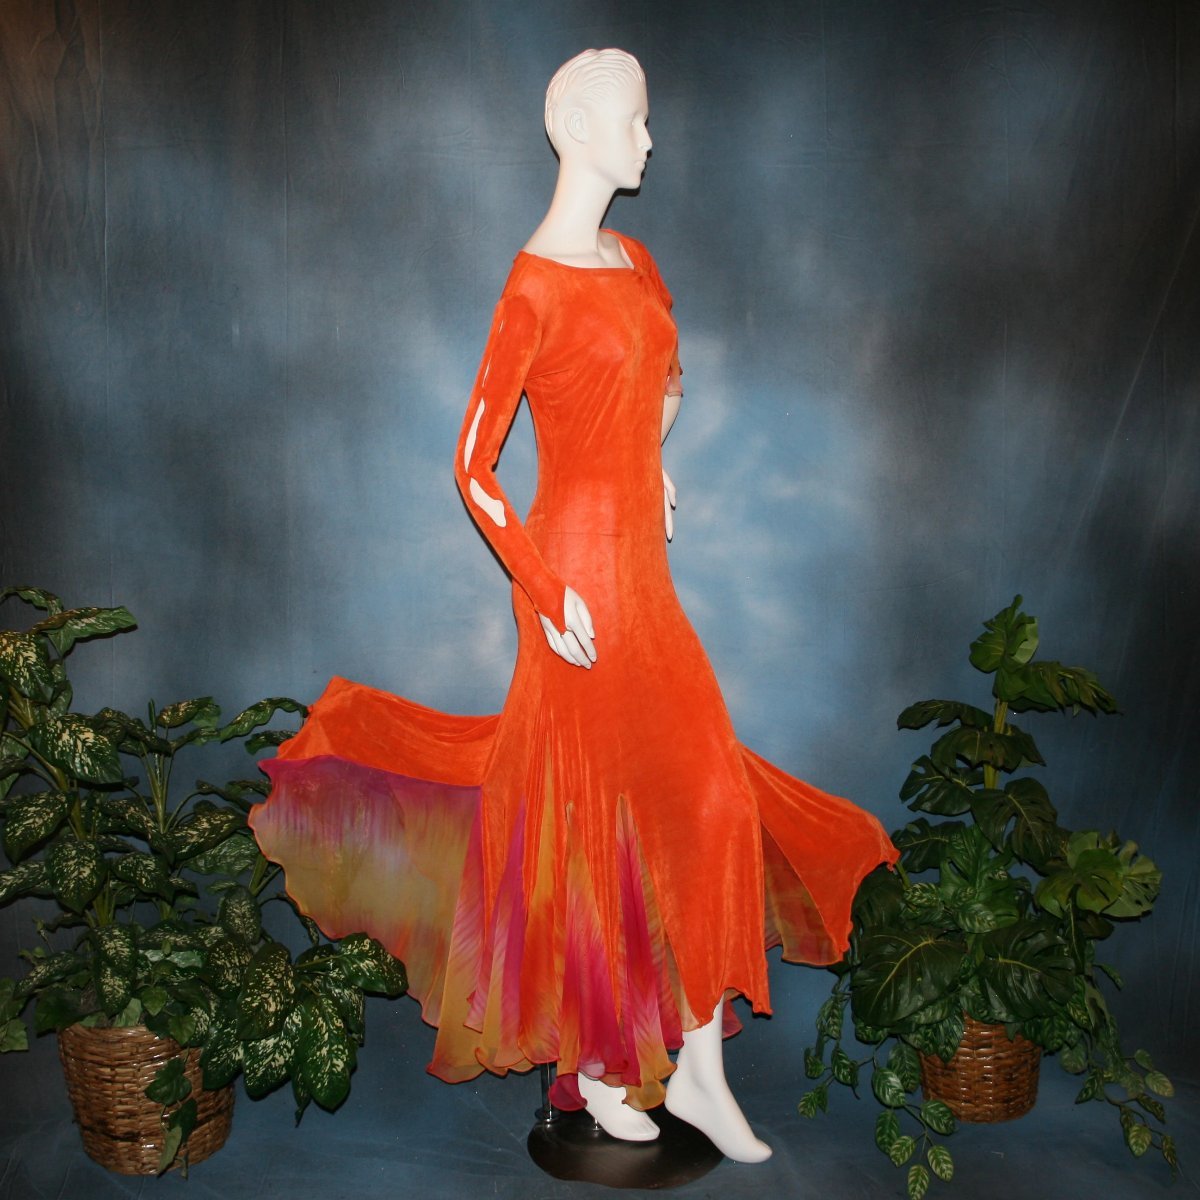 side view of Orange social ballroom dress created in luxurious solid slinky fabric with chiffon insets of rainbow oranges & yellows, with hand beading on arm draping. Very full around bottom, and makes a great beginner ballroom dancer smooth dress.